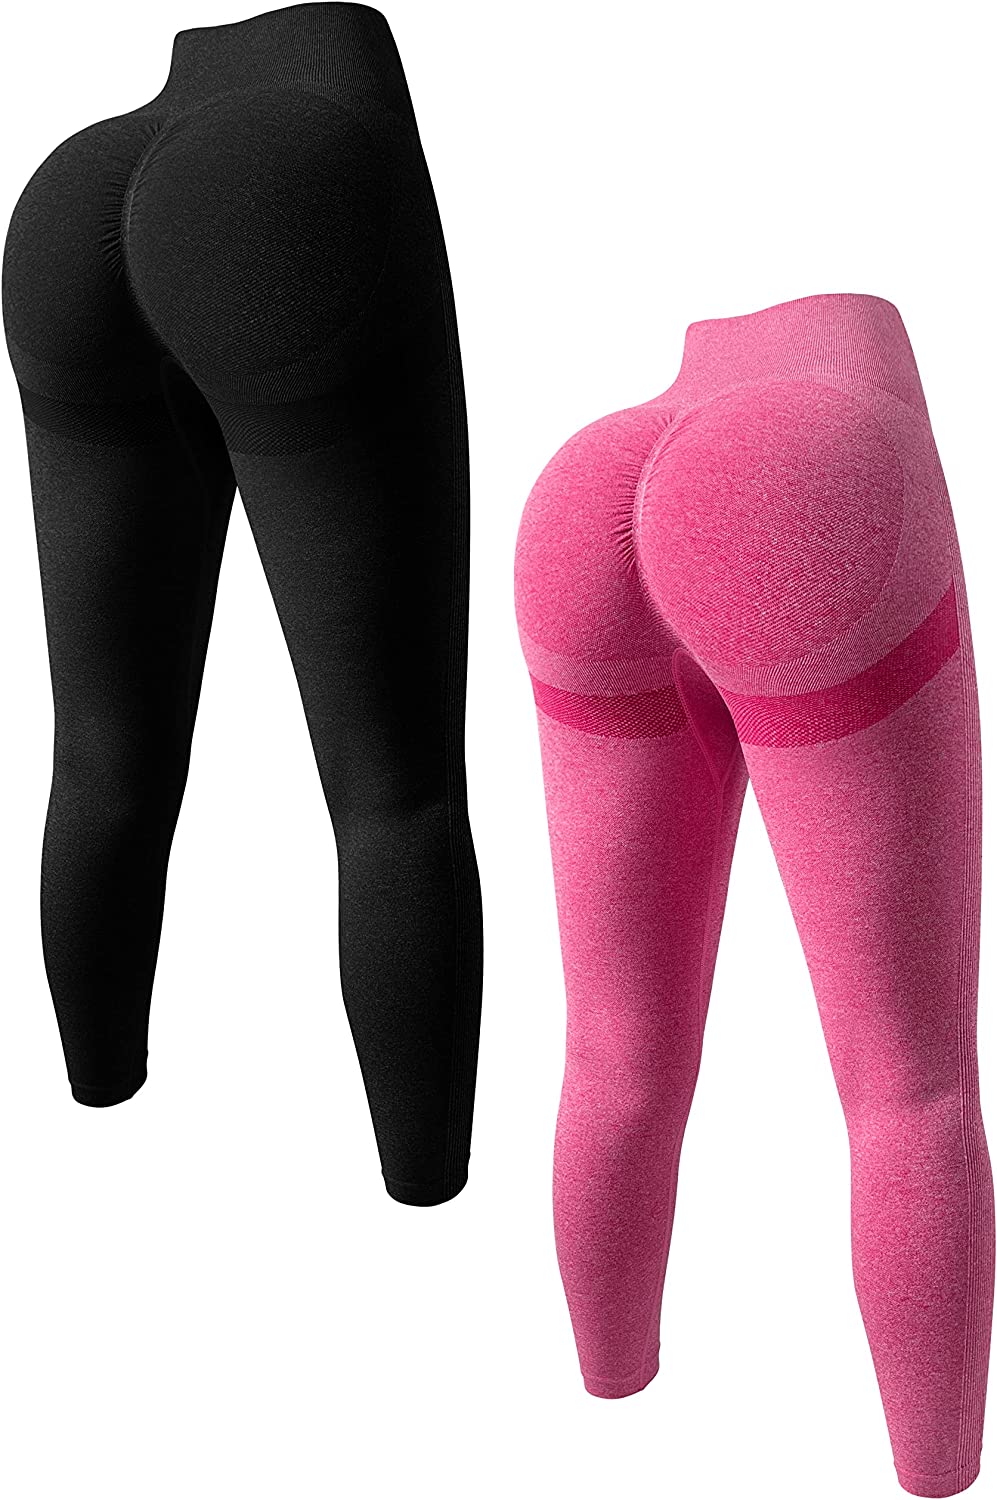 OQQ autumn and winter XS - XL yoga pants women's sports and